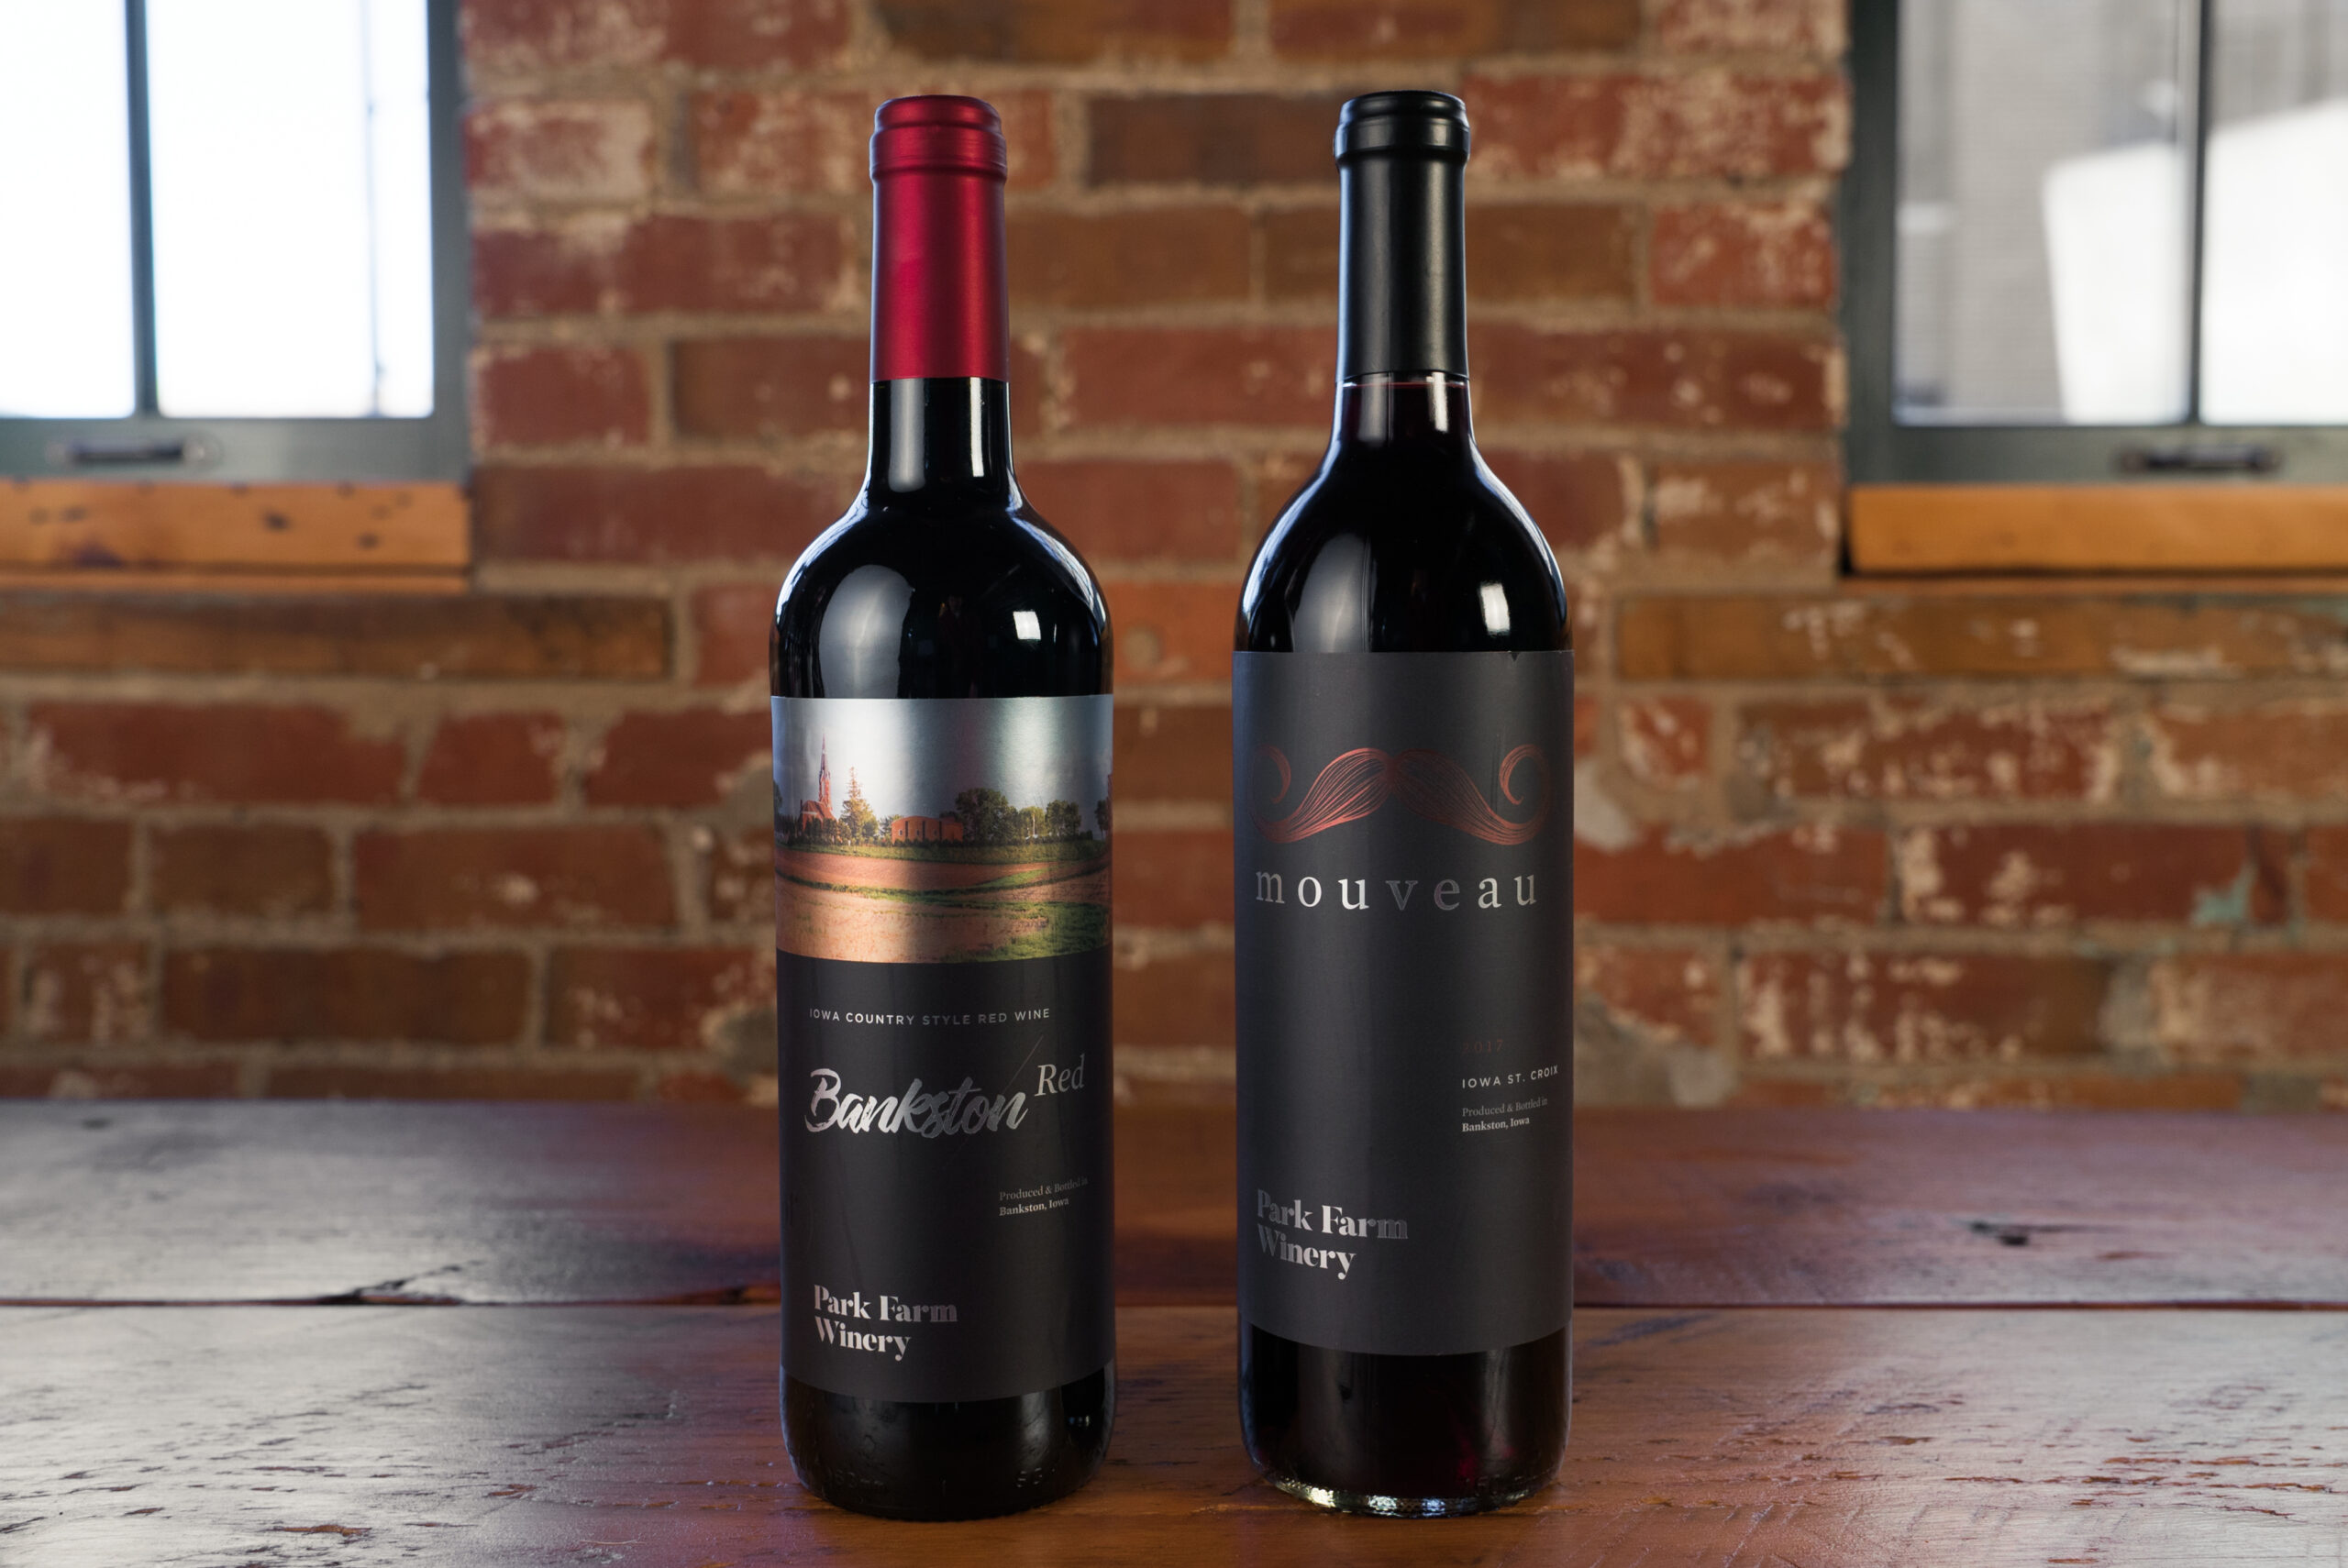 Two different types of wine listing varietals on their bottle labels.